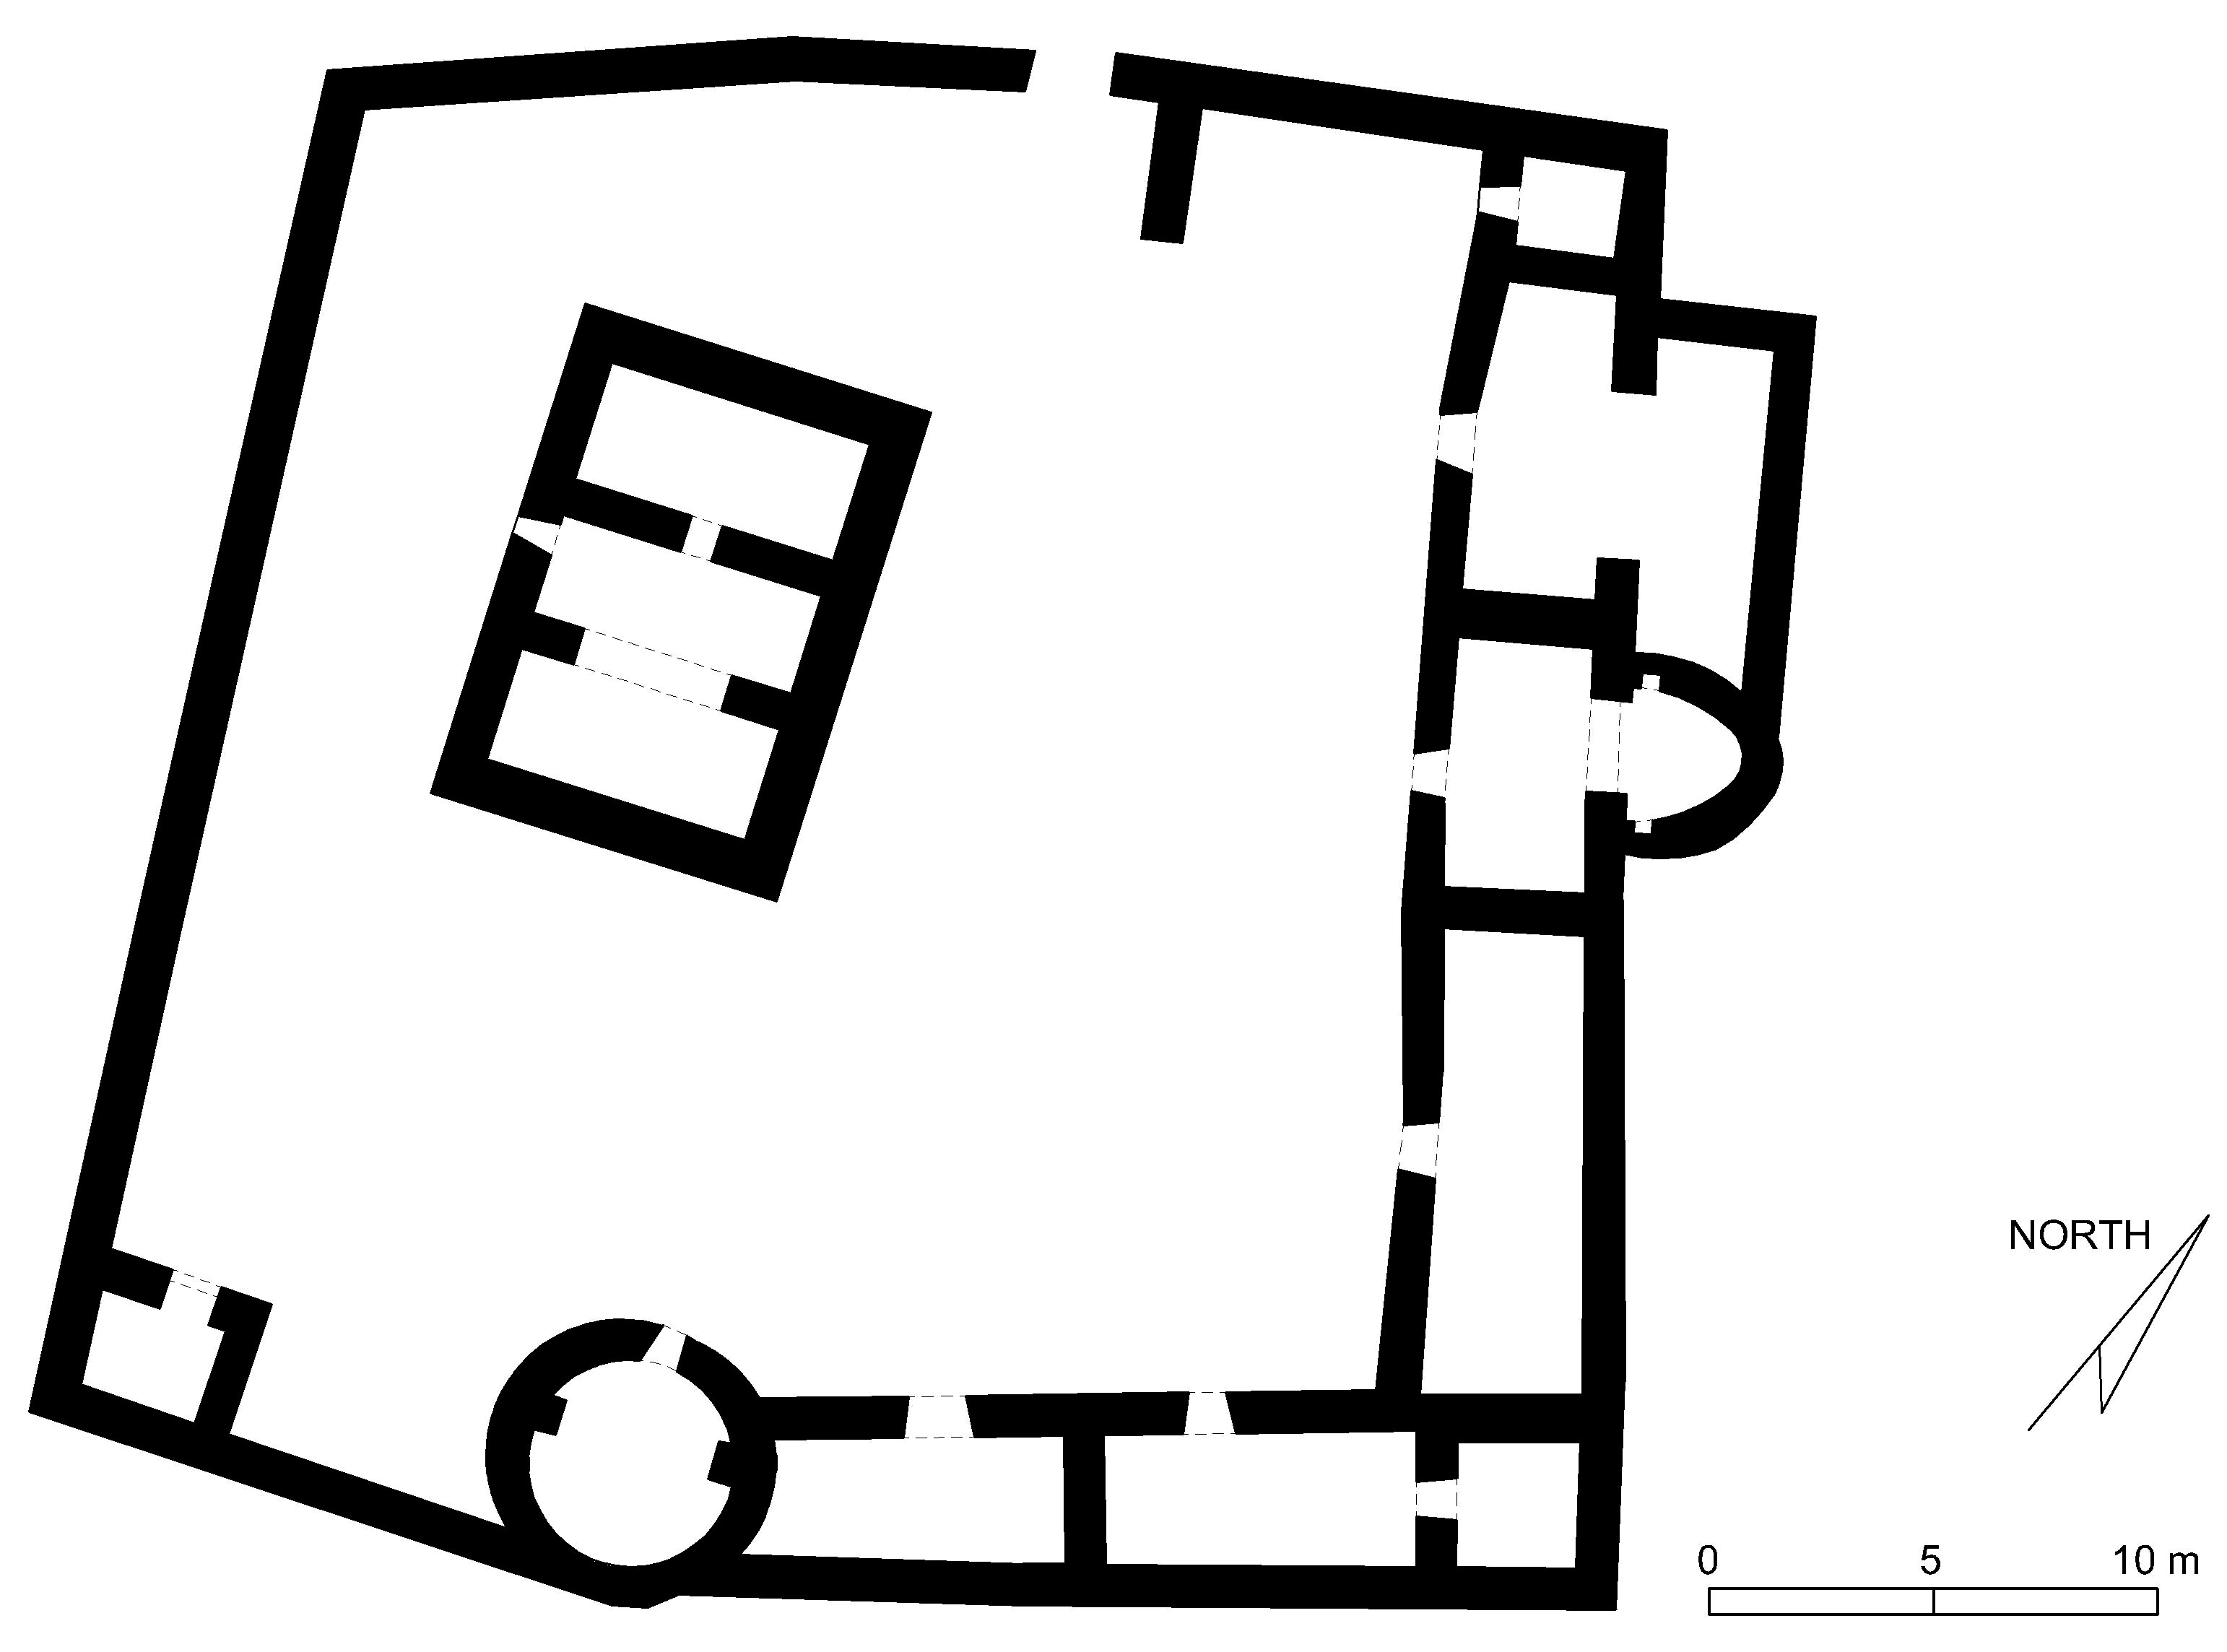 Qasr Burqu' - Floor plan of qasr in AutoCAD 2000 format. Click the download button to download a zipped file containing the .dwg file.